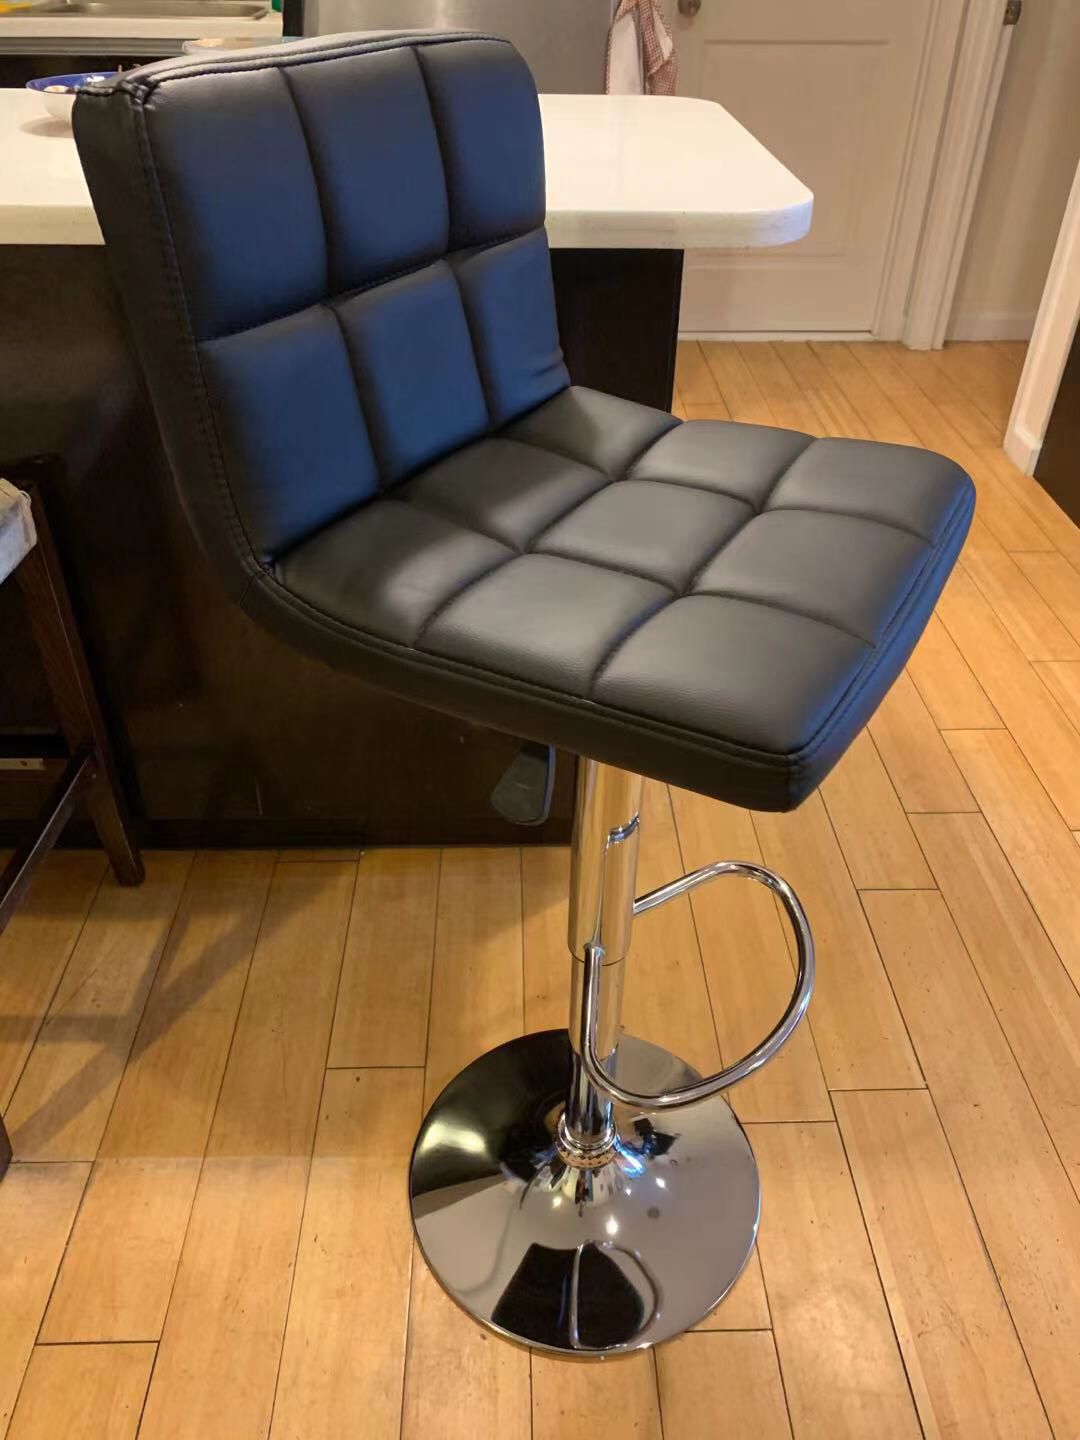 TWO bar chairs, adjustable bar stool. Brand new and unopened.